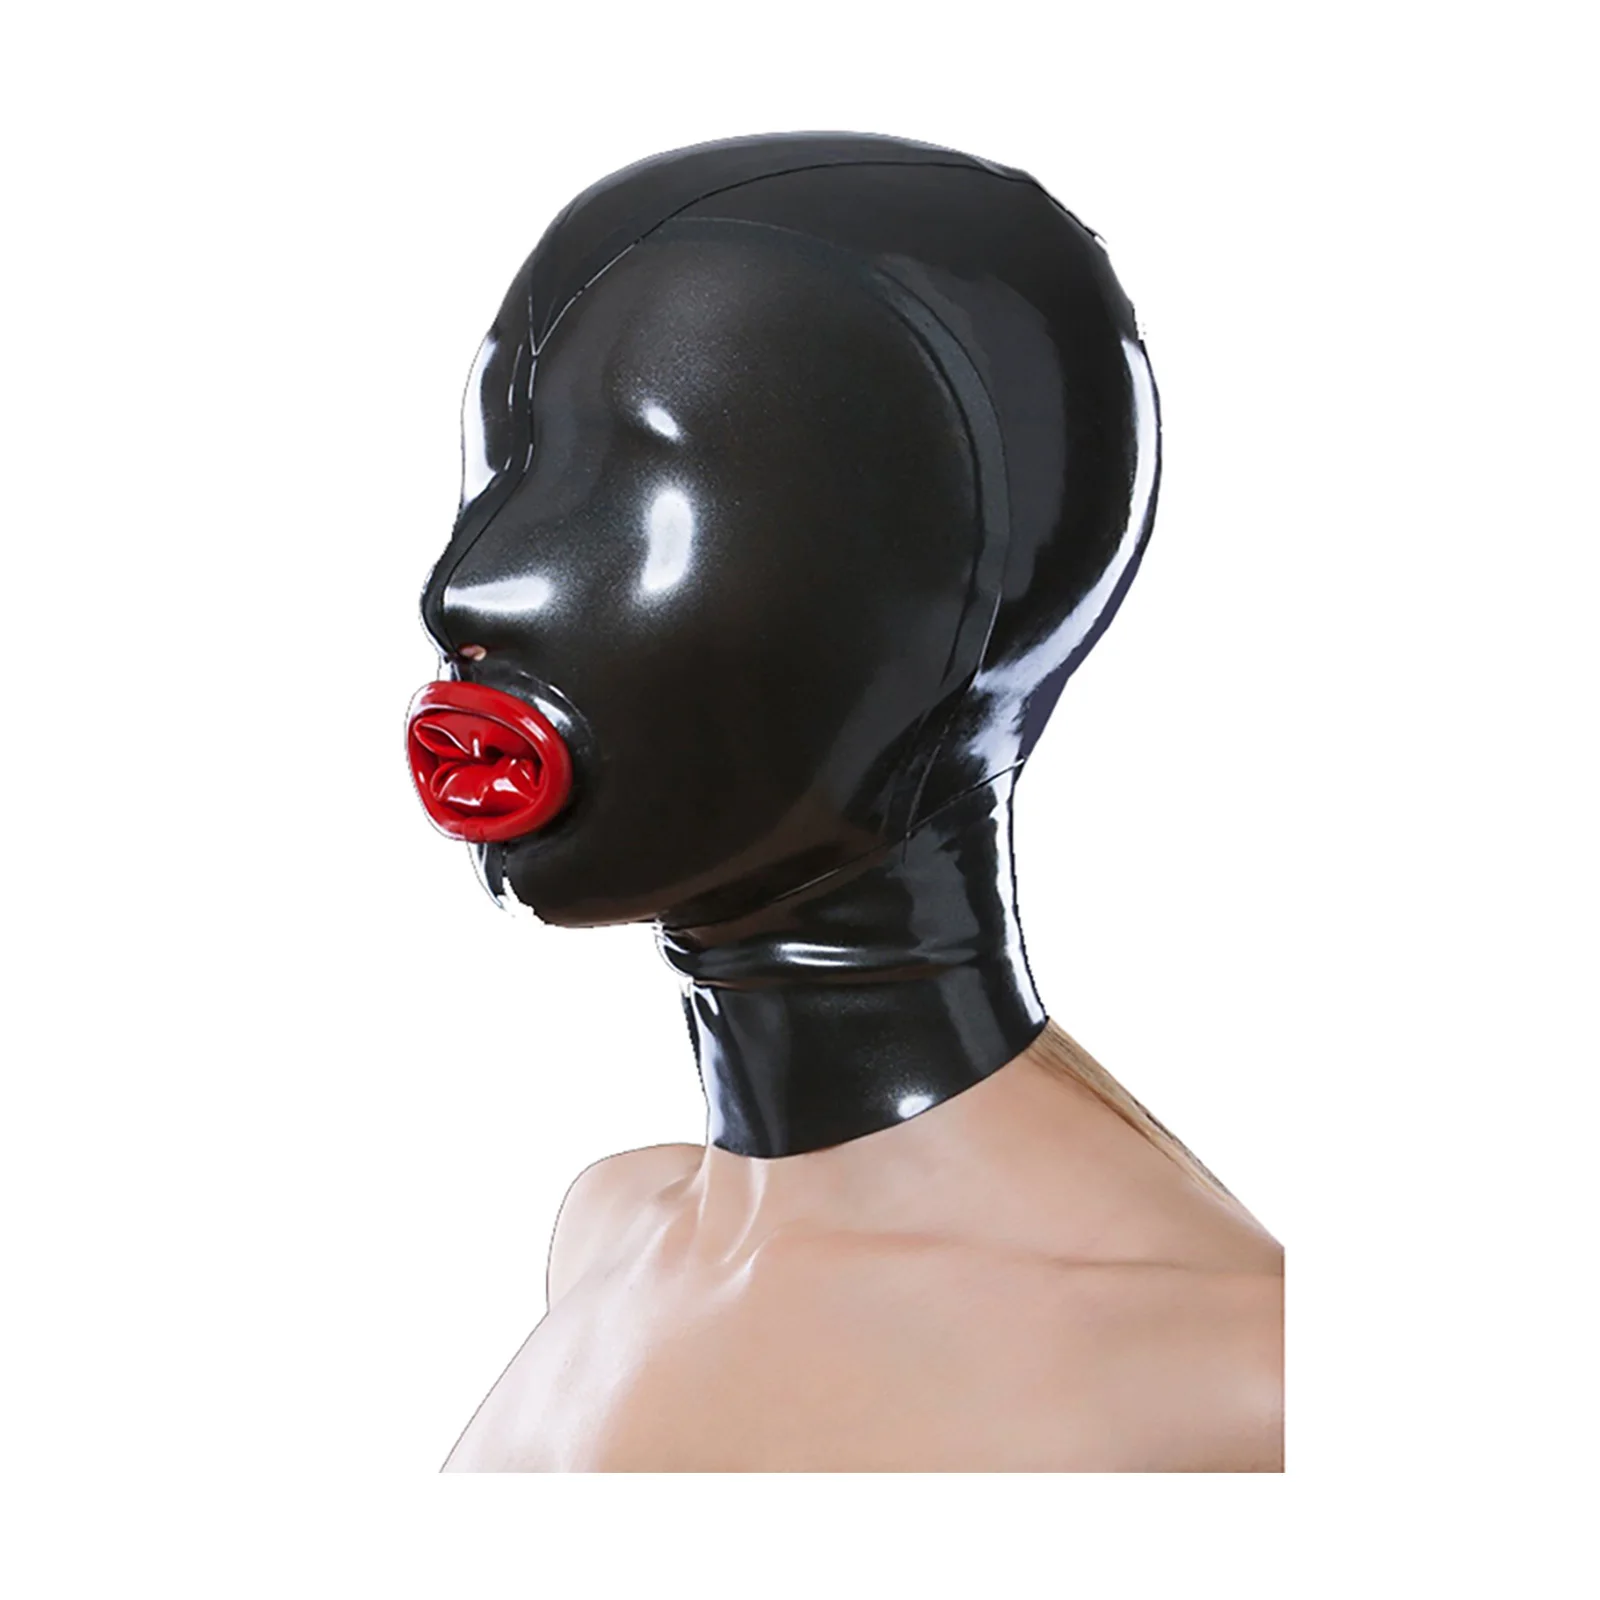 

MONNIK Latex Hood Black Unisex Mask with Red Oral Sleeve Rear Zipper Handmade for Fetish Catsuit Cosplay Party Clubwear